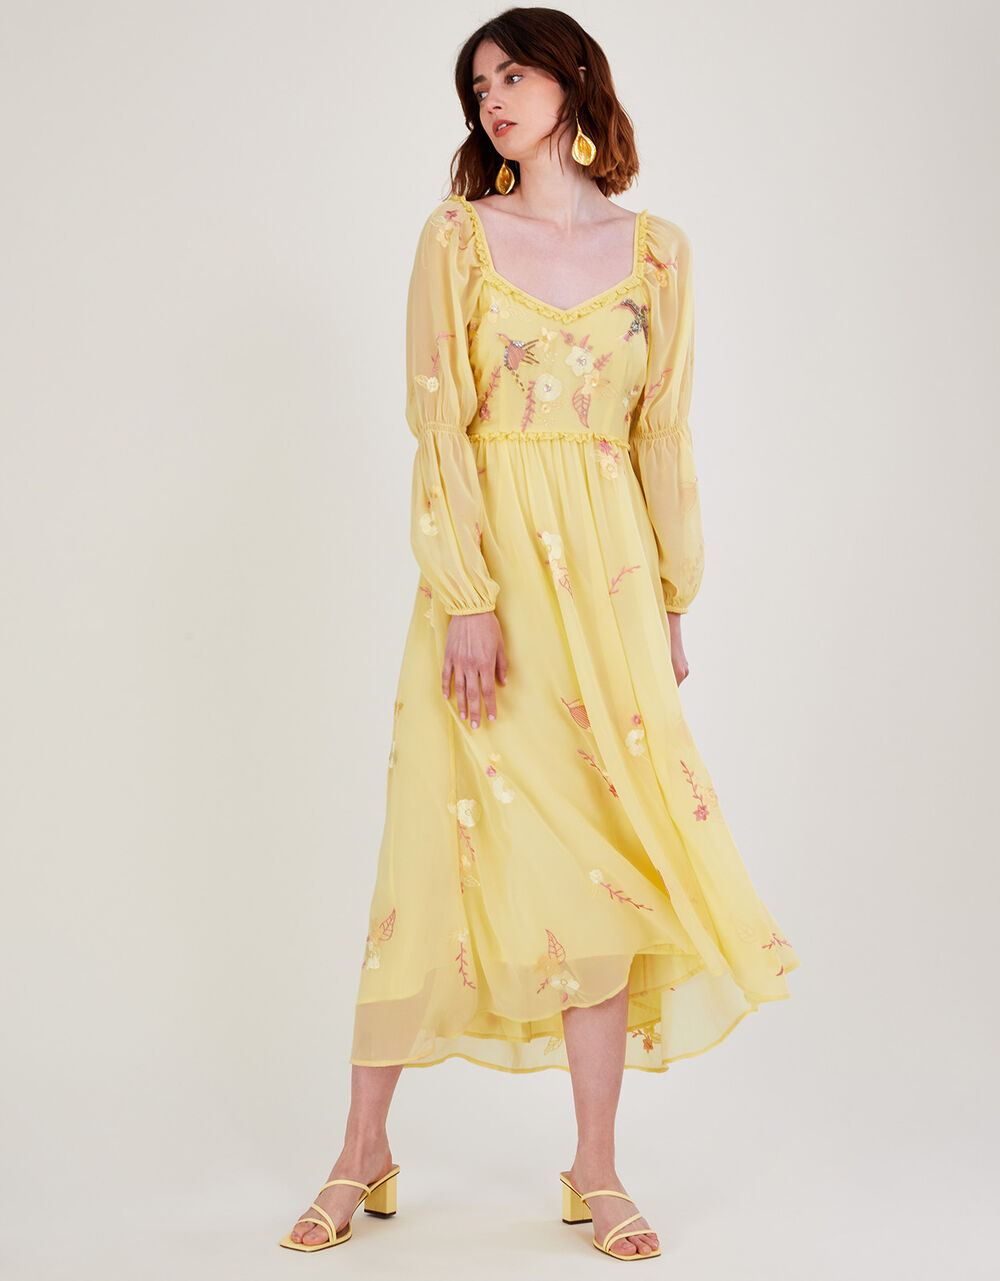 Women Dresses | Heidi Embellished Midi Dress in Recycled Polyester Yellow - BO11395